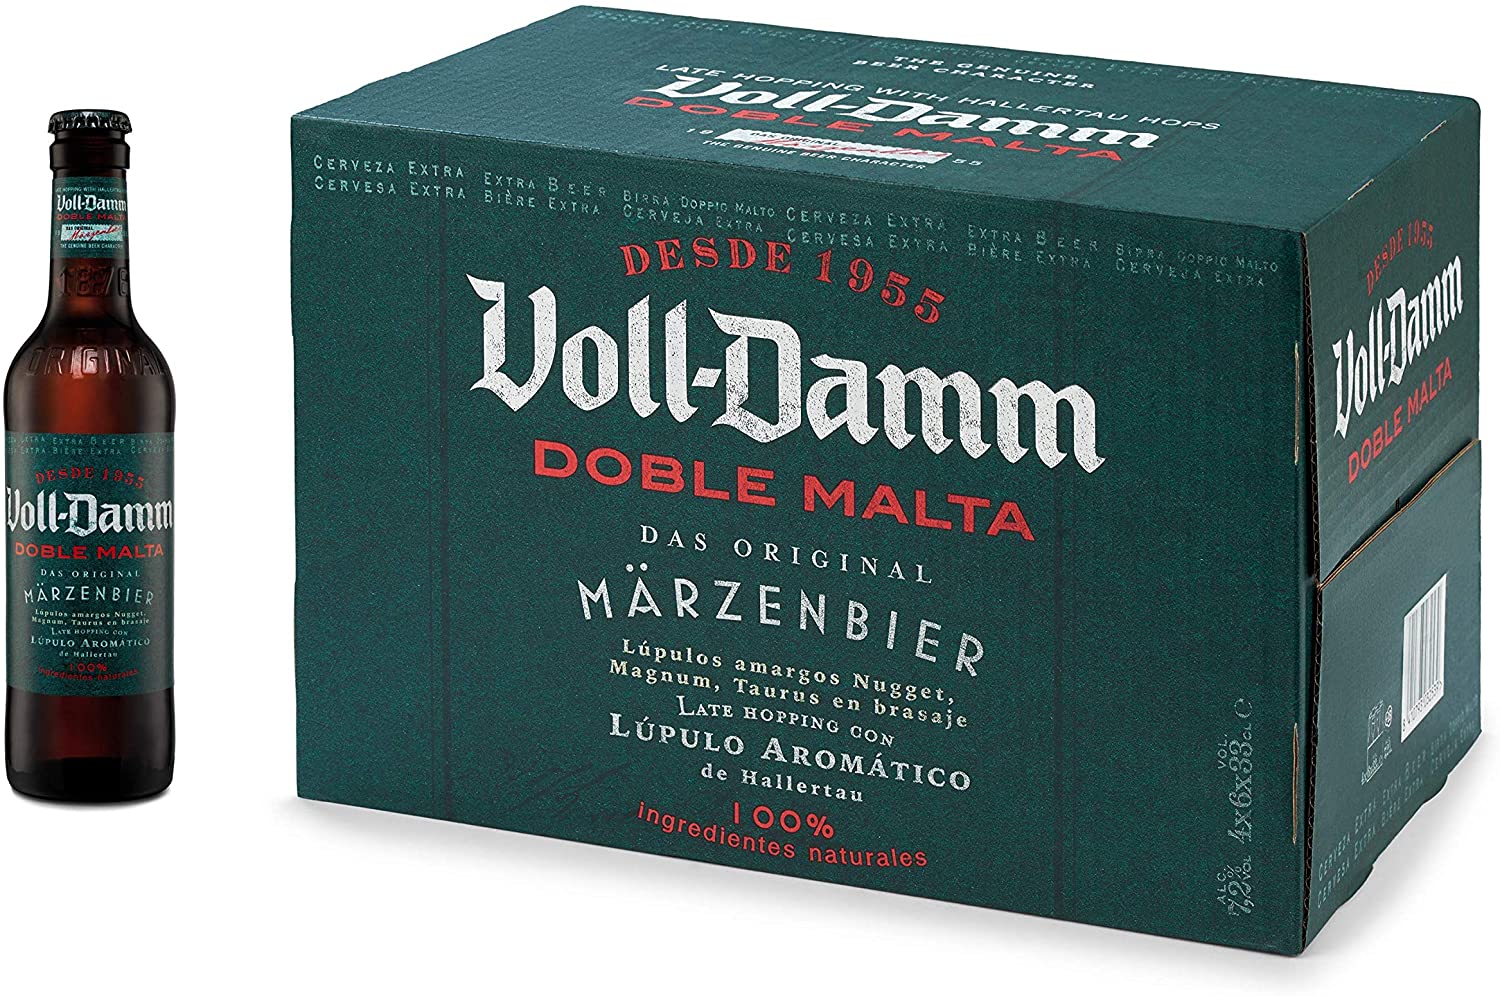 Voll Damm botella 33cl pack 24